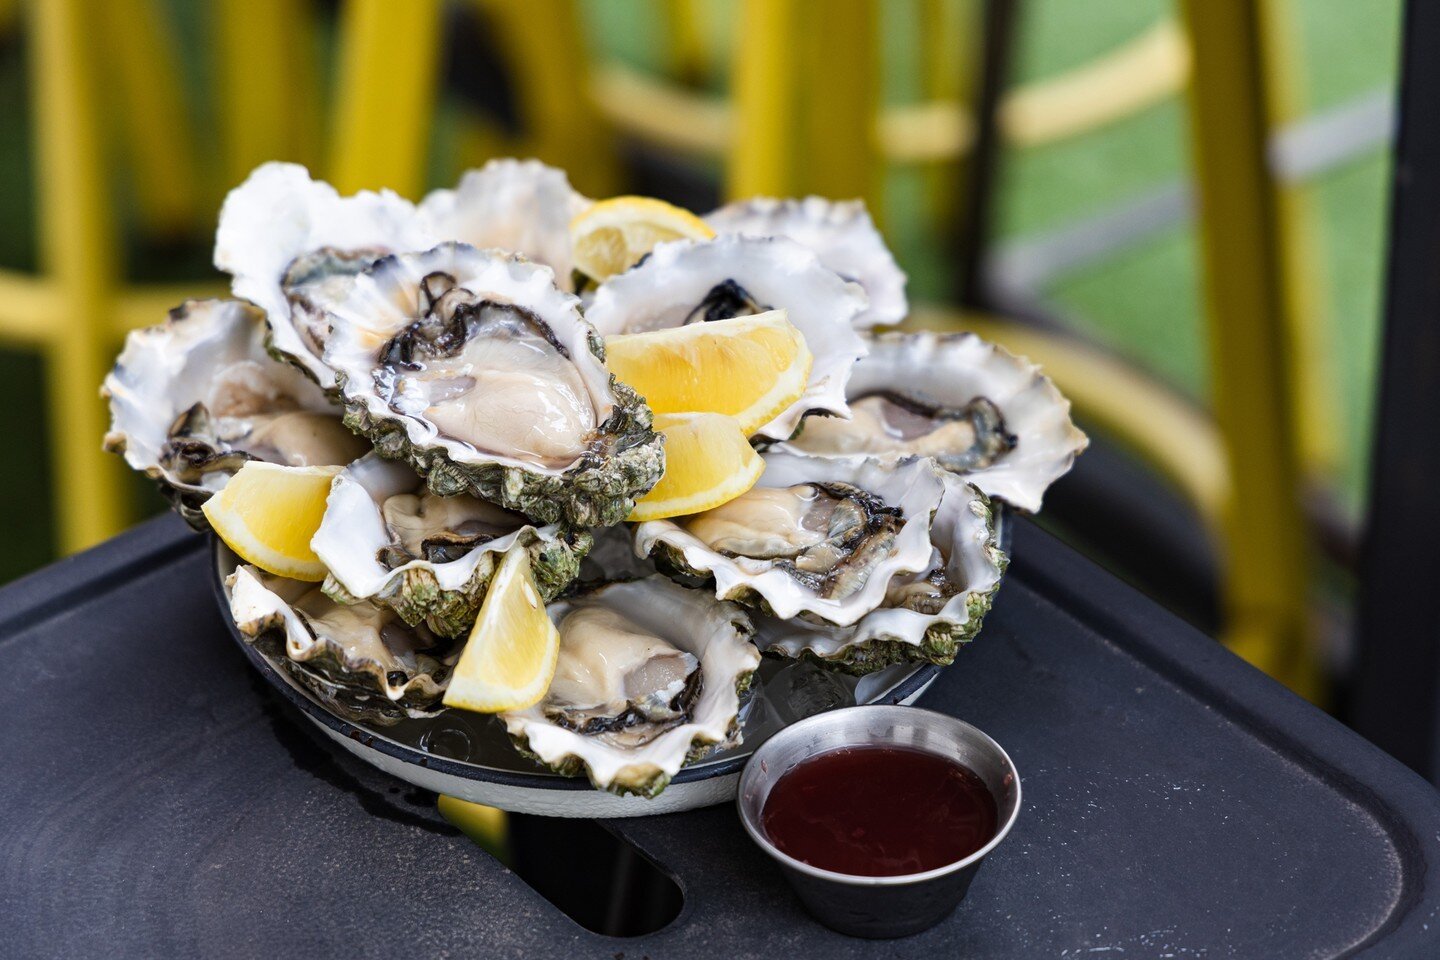 Oyster delight! Best experienced during our Daily Happy Hour! Available at all our outlets! See you there! 🤩 Find details at http://tanukiraw.com/happy-hour.

 #sgfoodies #sgdining #sgrestaurants #japanesefood #oysters #happyhour